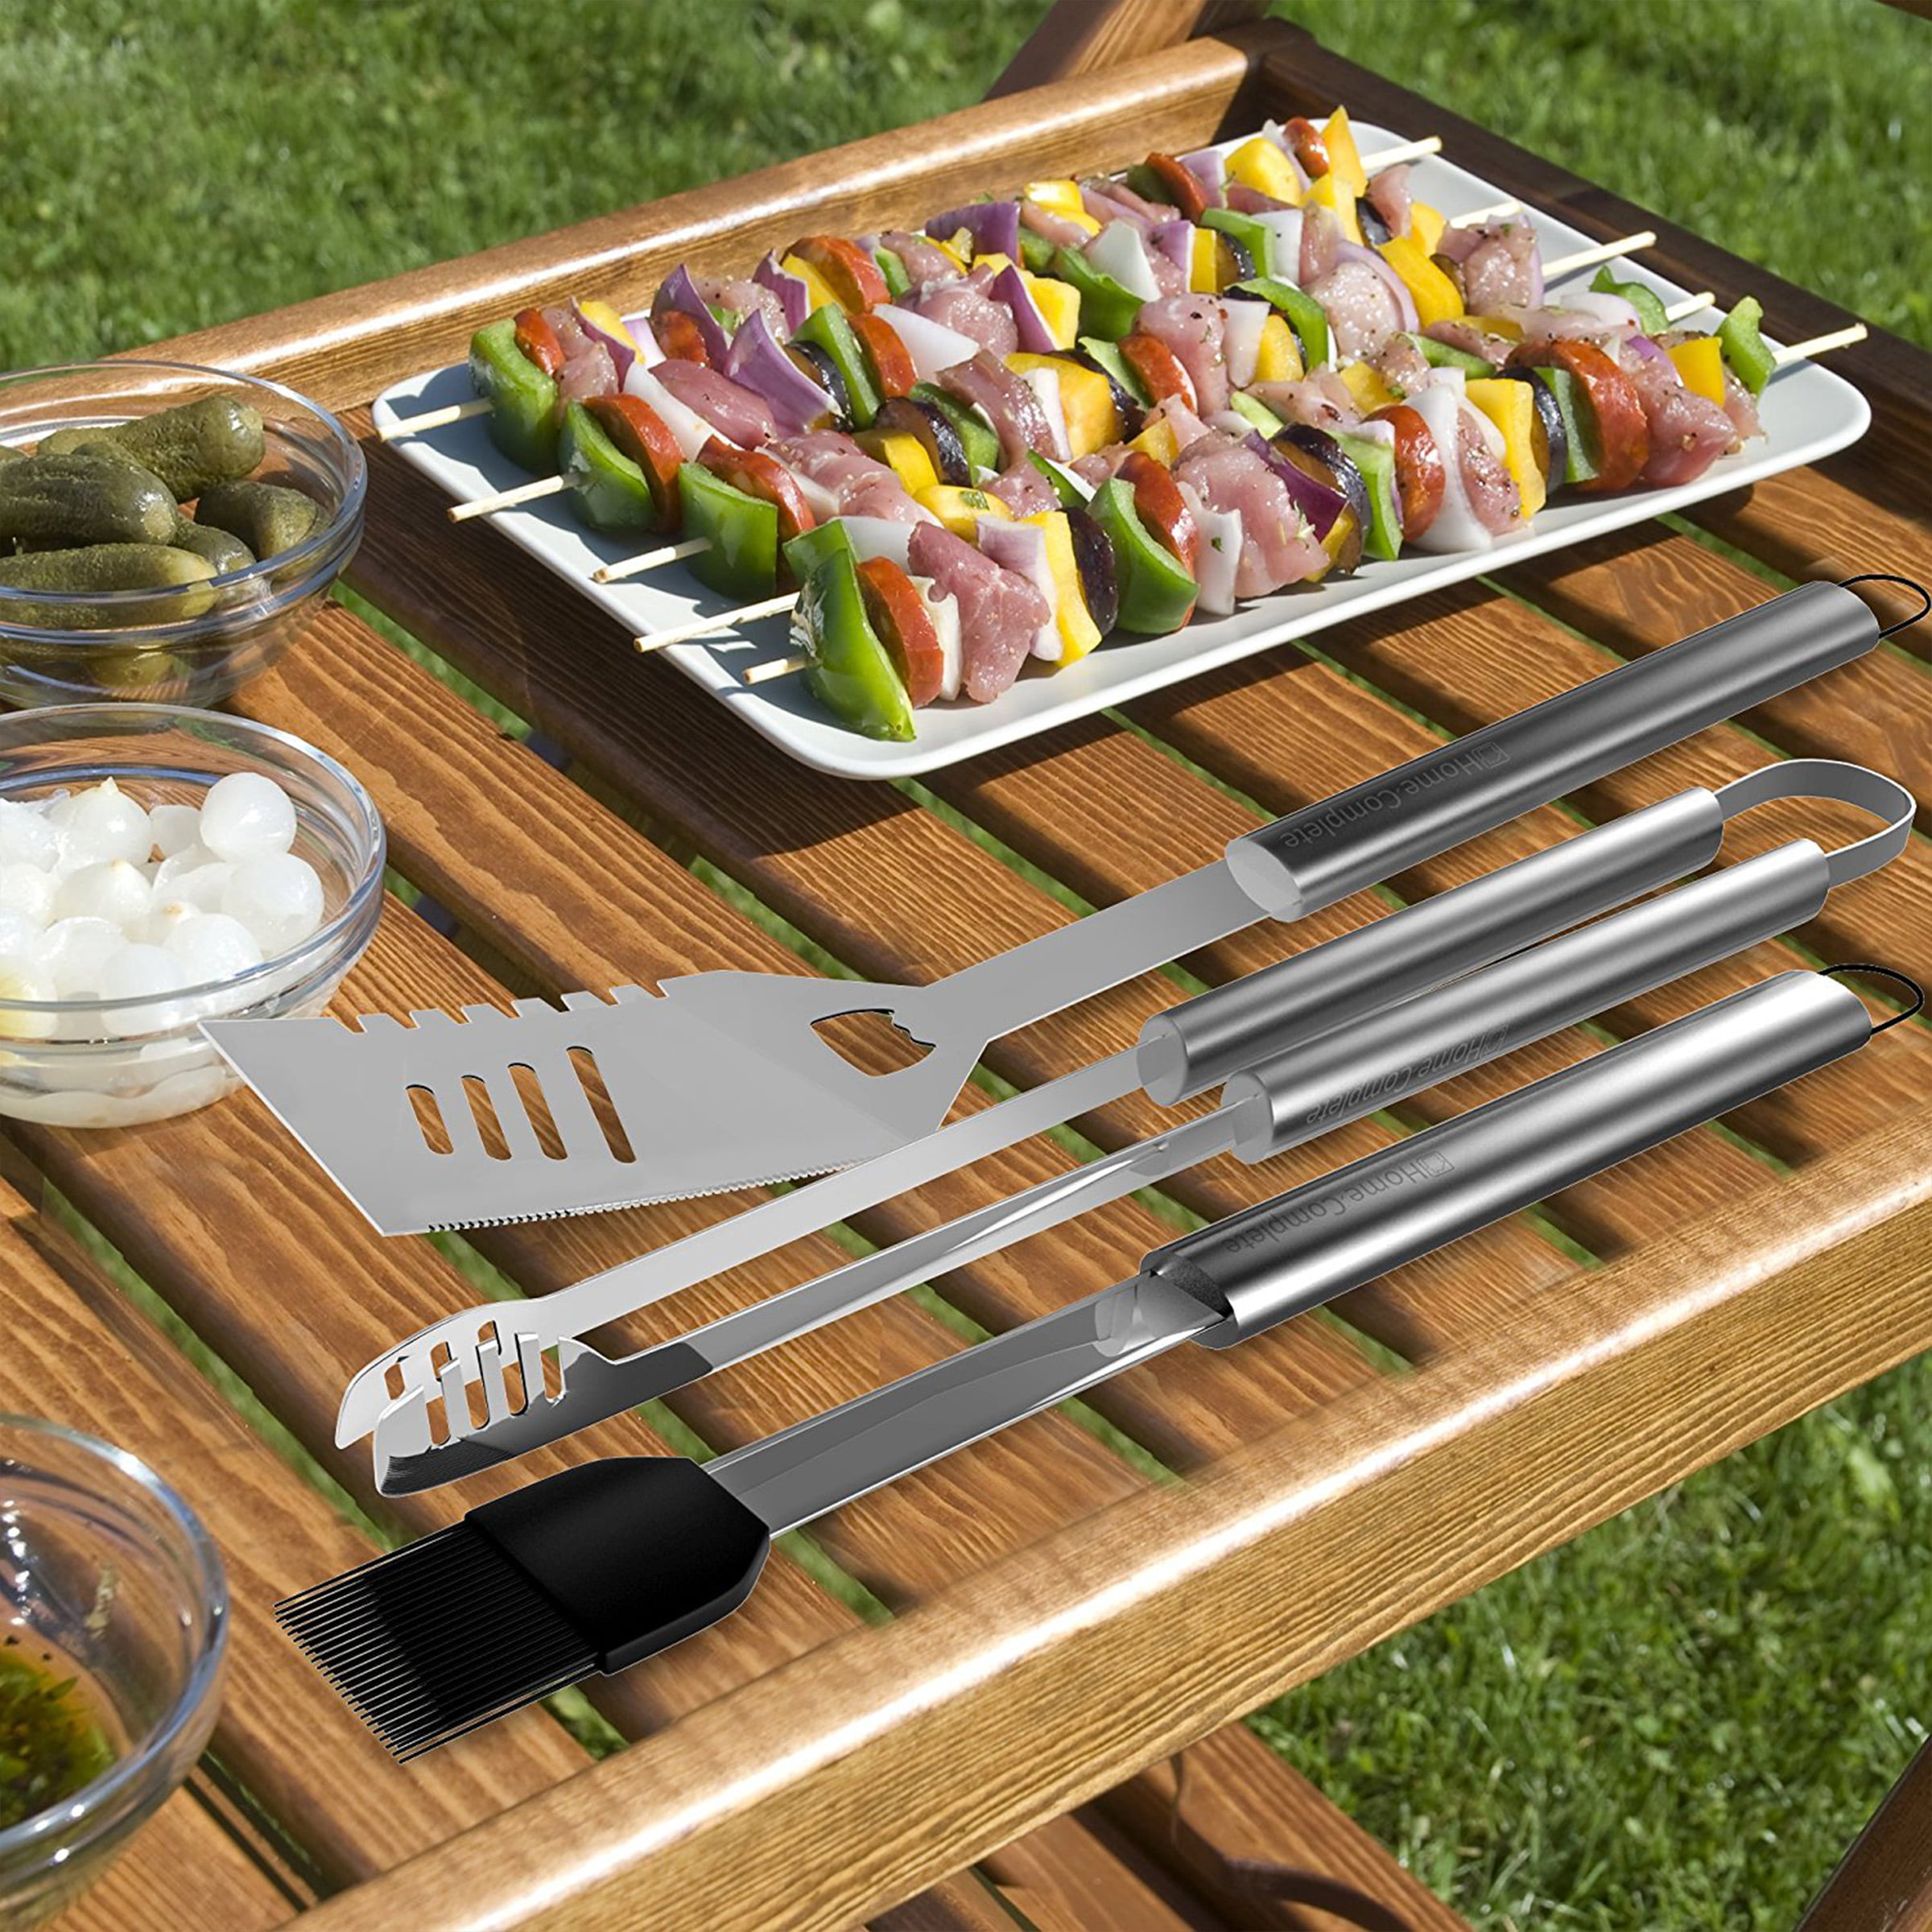 AISITIN BBQ Grill Accessories 16-Inch Stainless Steel Grill Sets for Men,  8Pcs Heavy Duty Grill Utensils Set for Smoker, Camping, Thicker Grill Tools